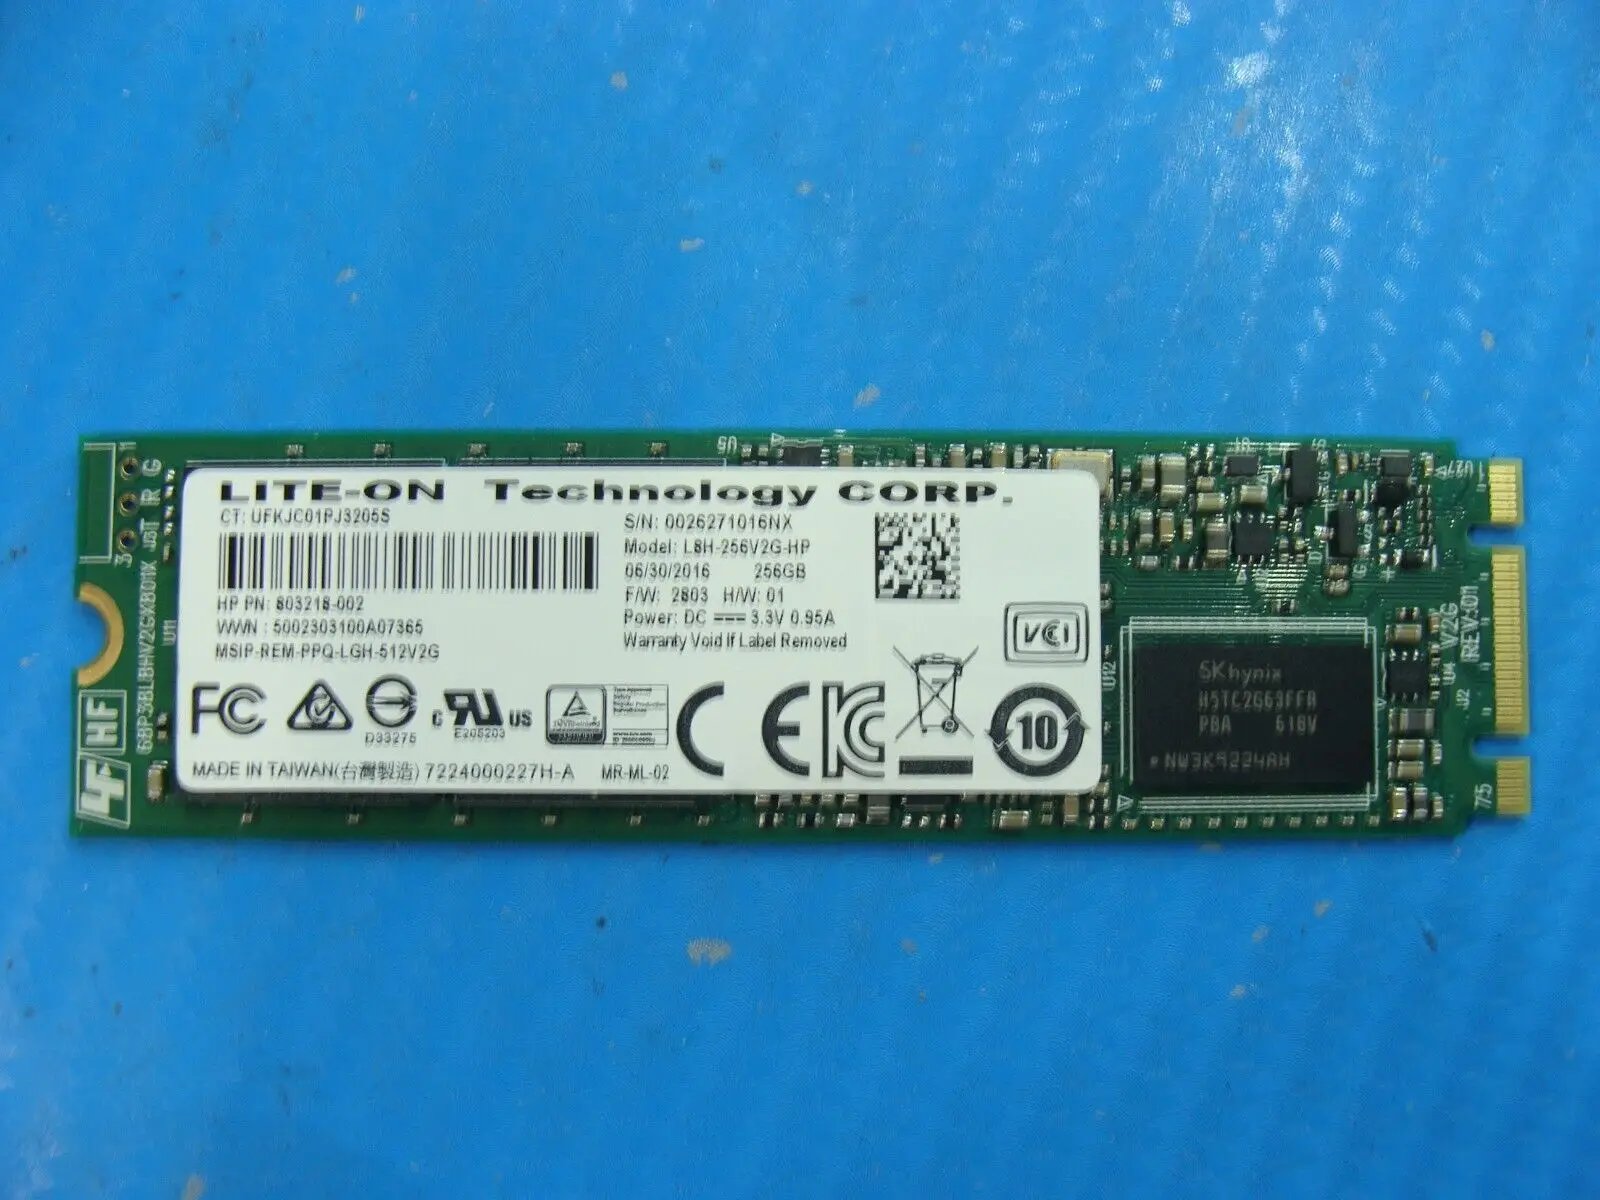 HP 15-ap012dx Lite-On 256GB SATA M.2 SSD Solid State Drive L8H-256V2G-HP